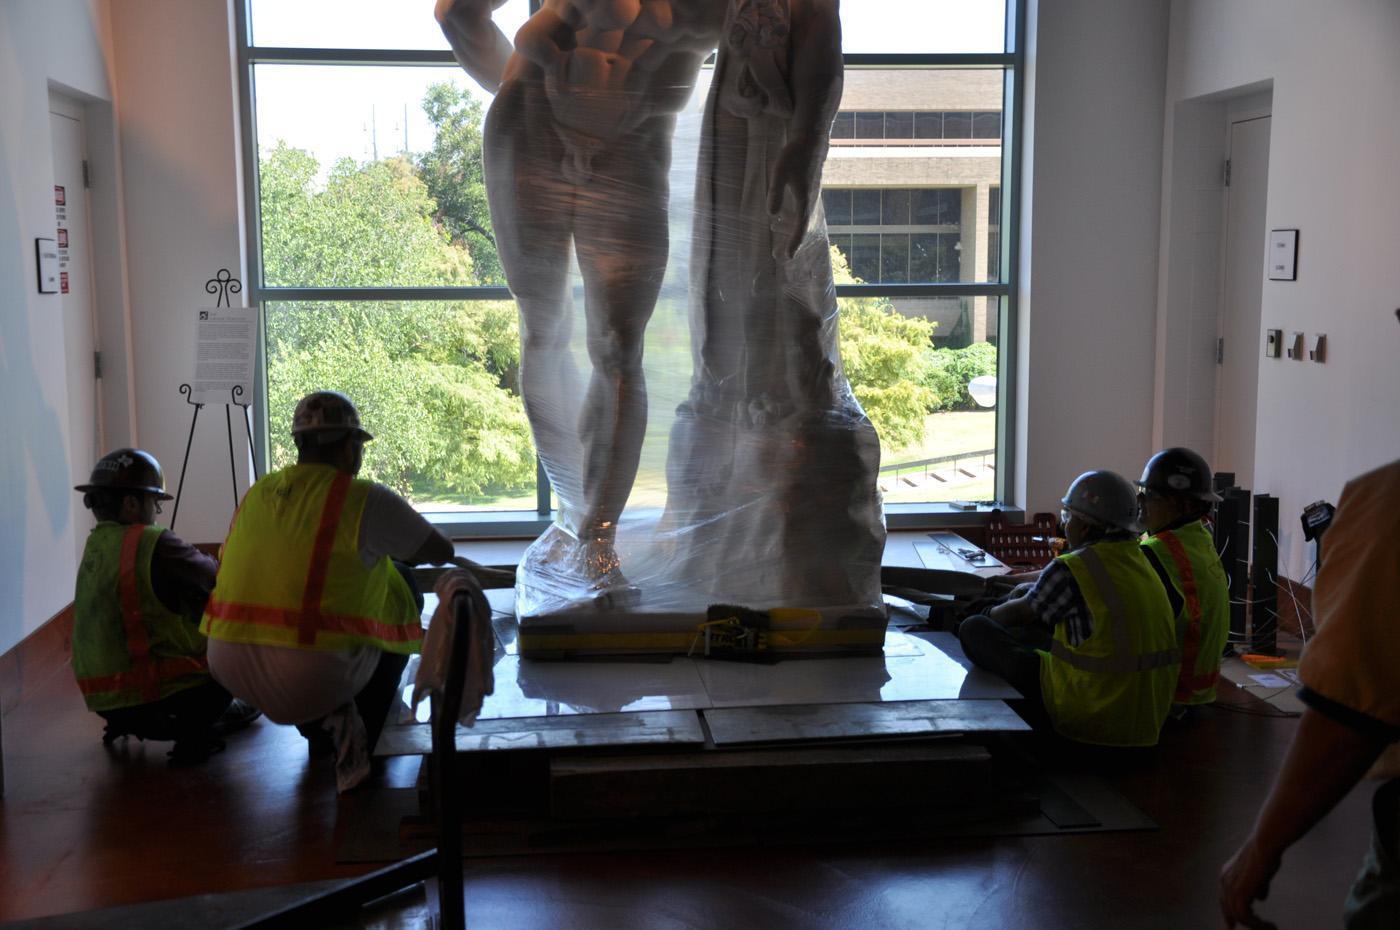 Front view of the bottom of the statue of the Farnese Hercules wrapped and being moved, while four men work on it, in the main lobby.